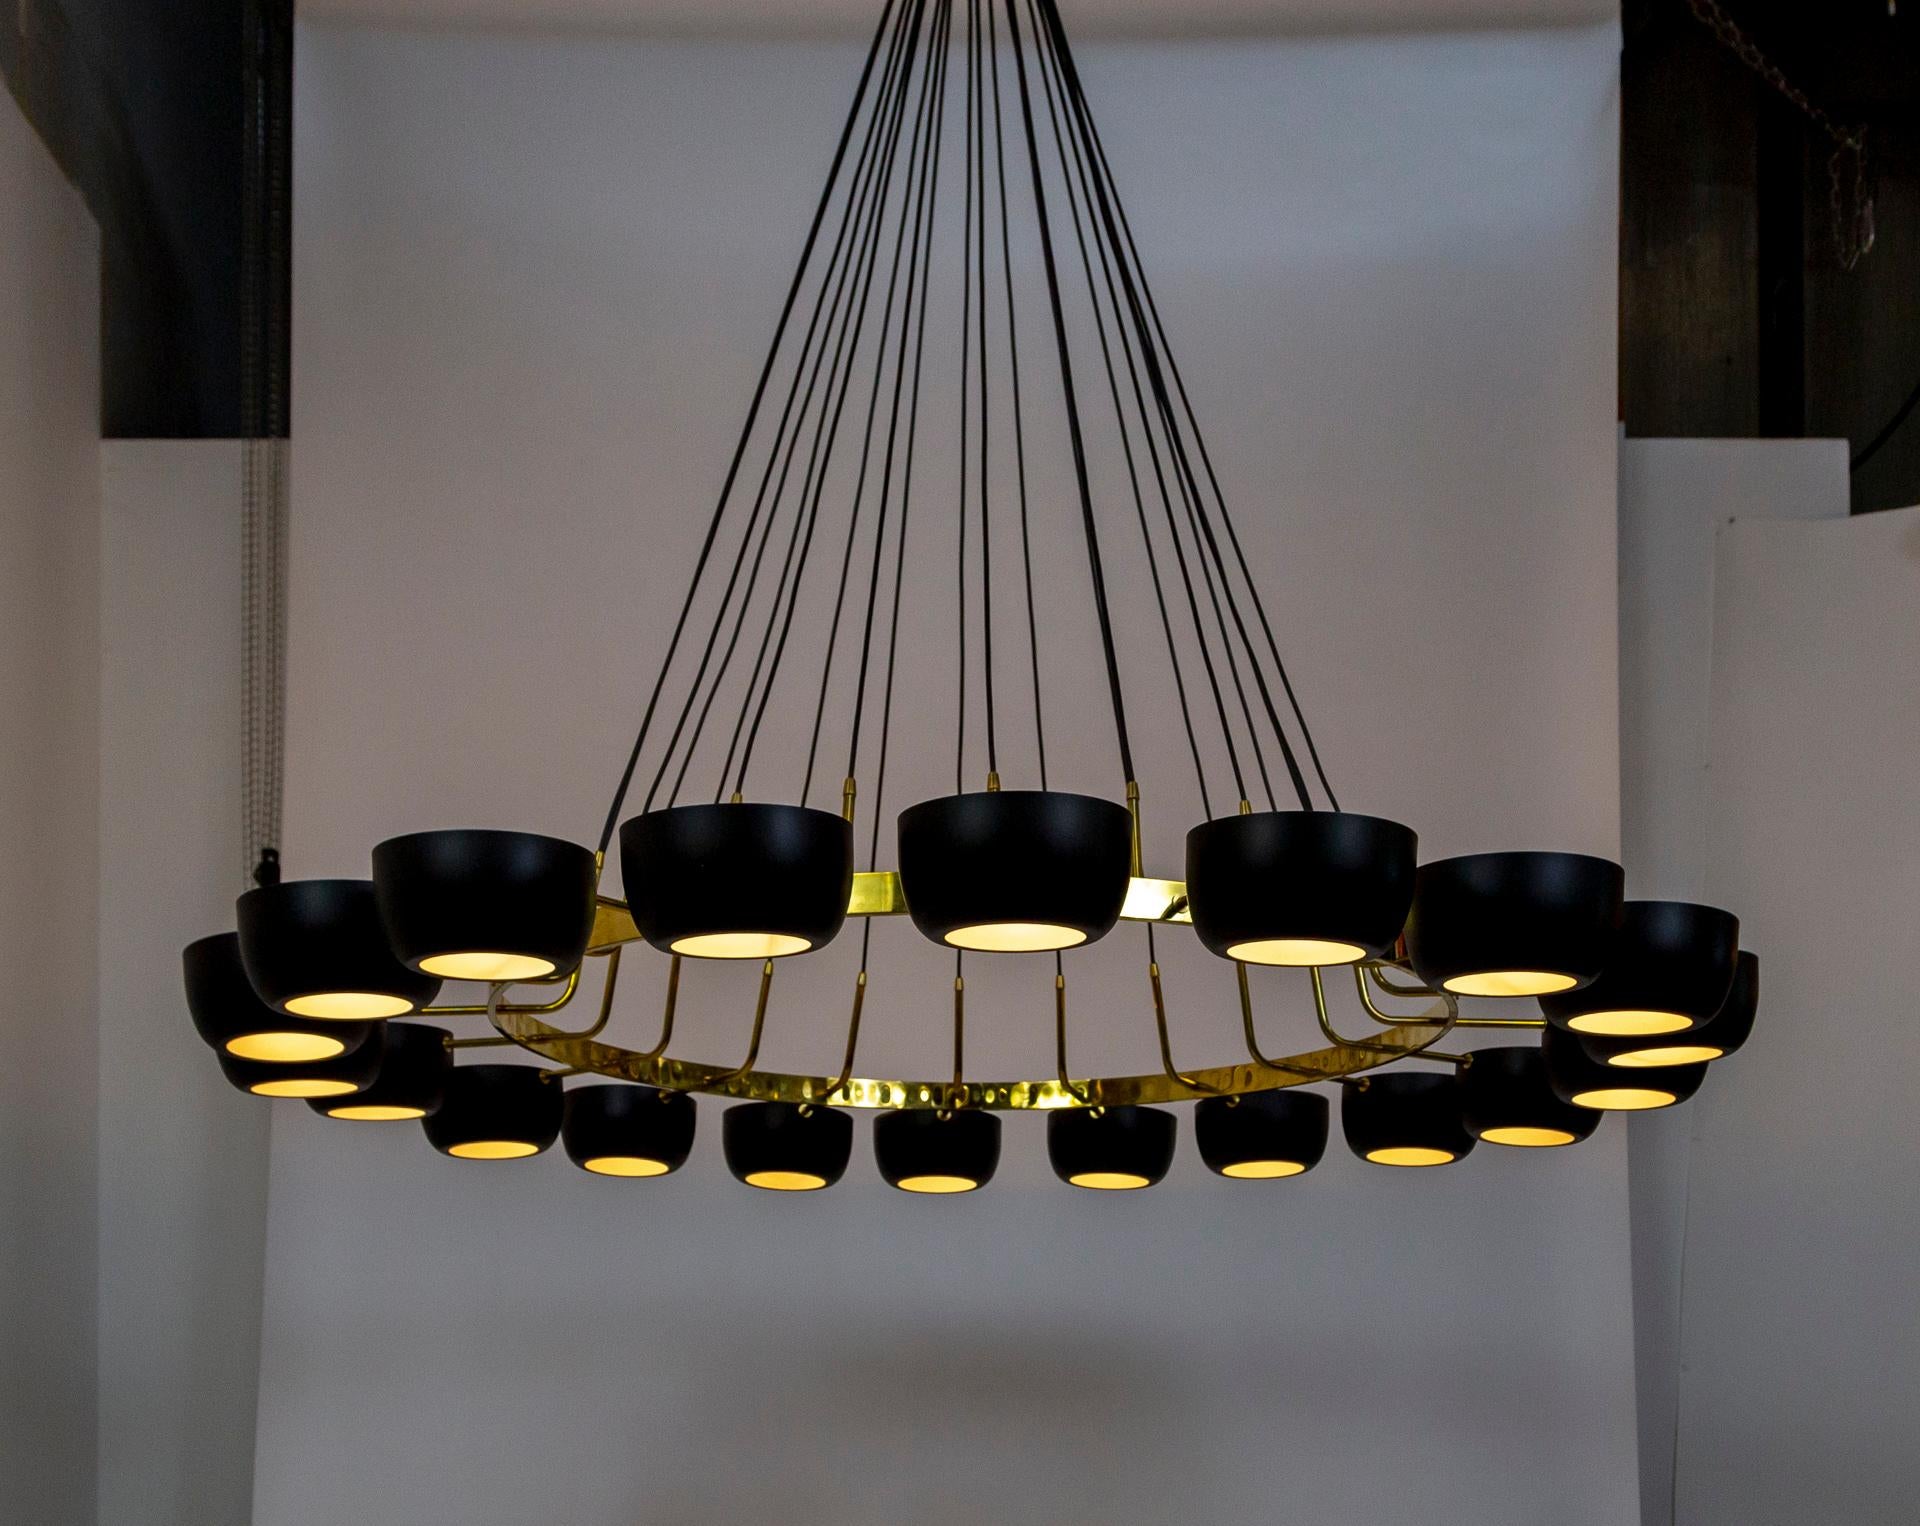 A huge, contemporary chandelier is made in Italian Mid-Century Modern style. It has a brass, ring structure that holds 20 lights with open-ended, bowl shades, projecting light both up and down. The shades are satin black, matching the black cords